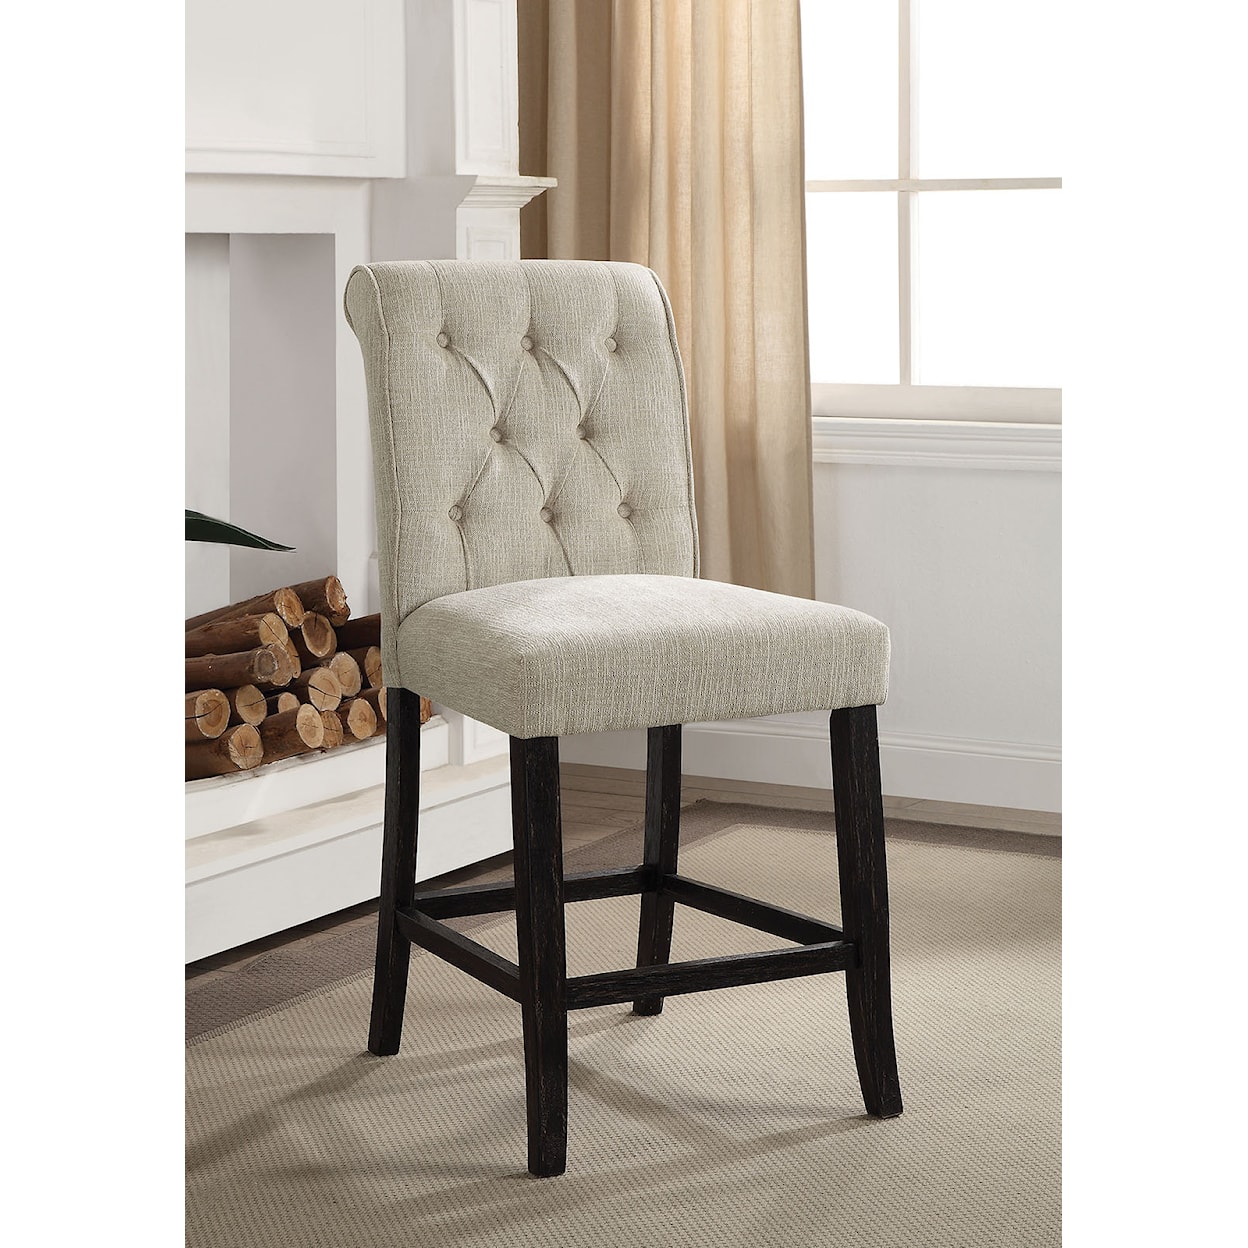 Furniture of America Izzy Counter Height Side Chair 2-Pack